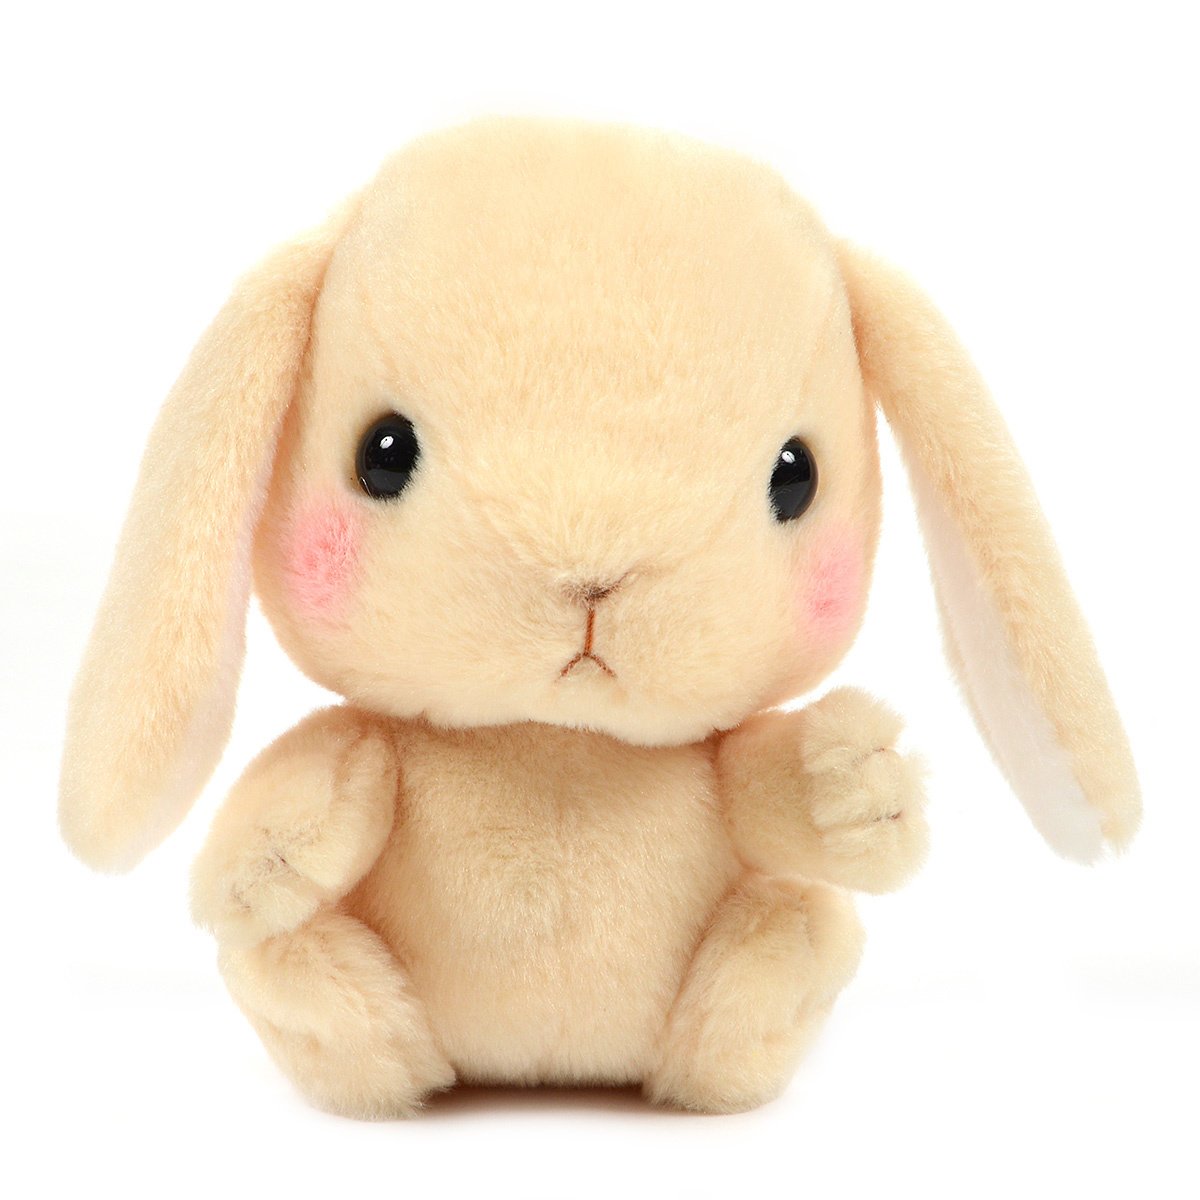 Amuse Bunny Plushie Cute Stuffed Animal Toy Beige 6 Inches